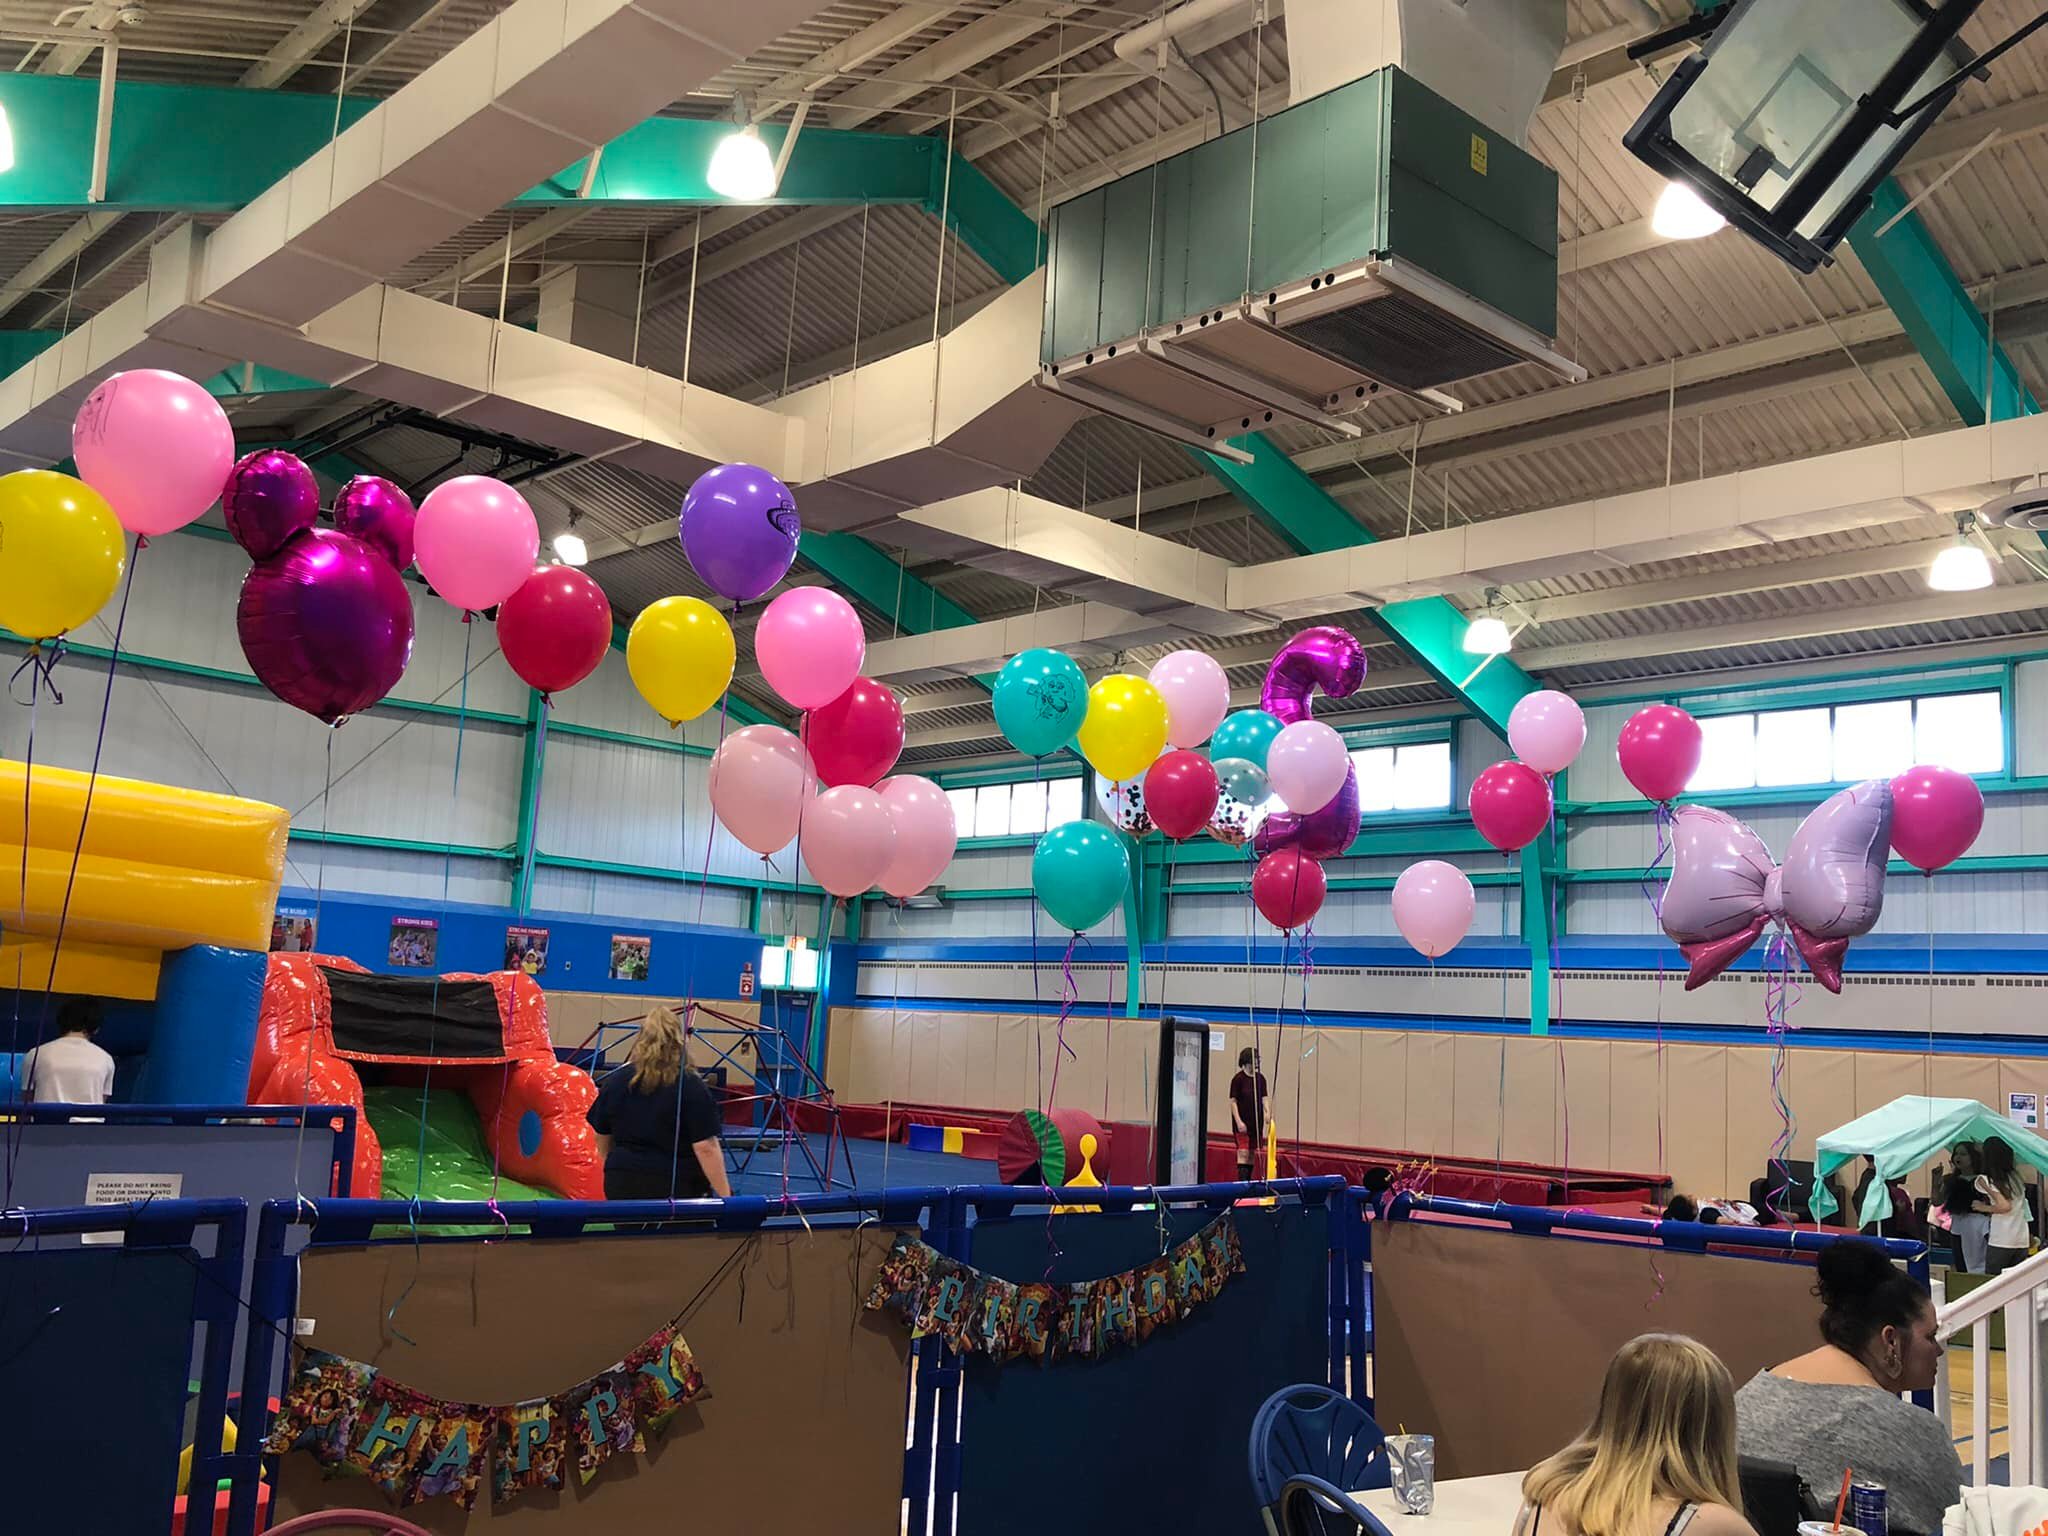 Play Zone decorated with balloons